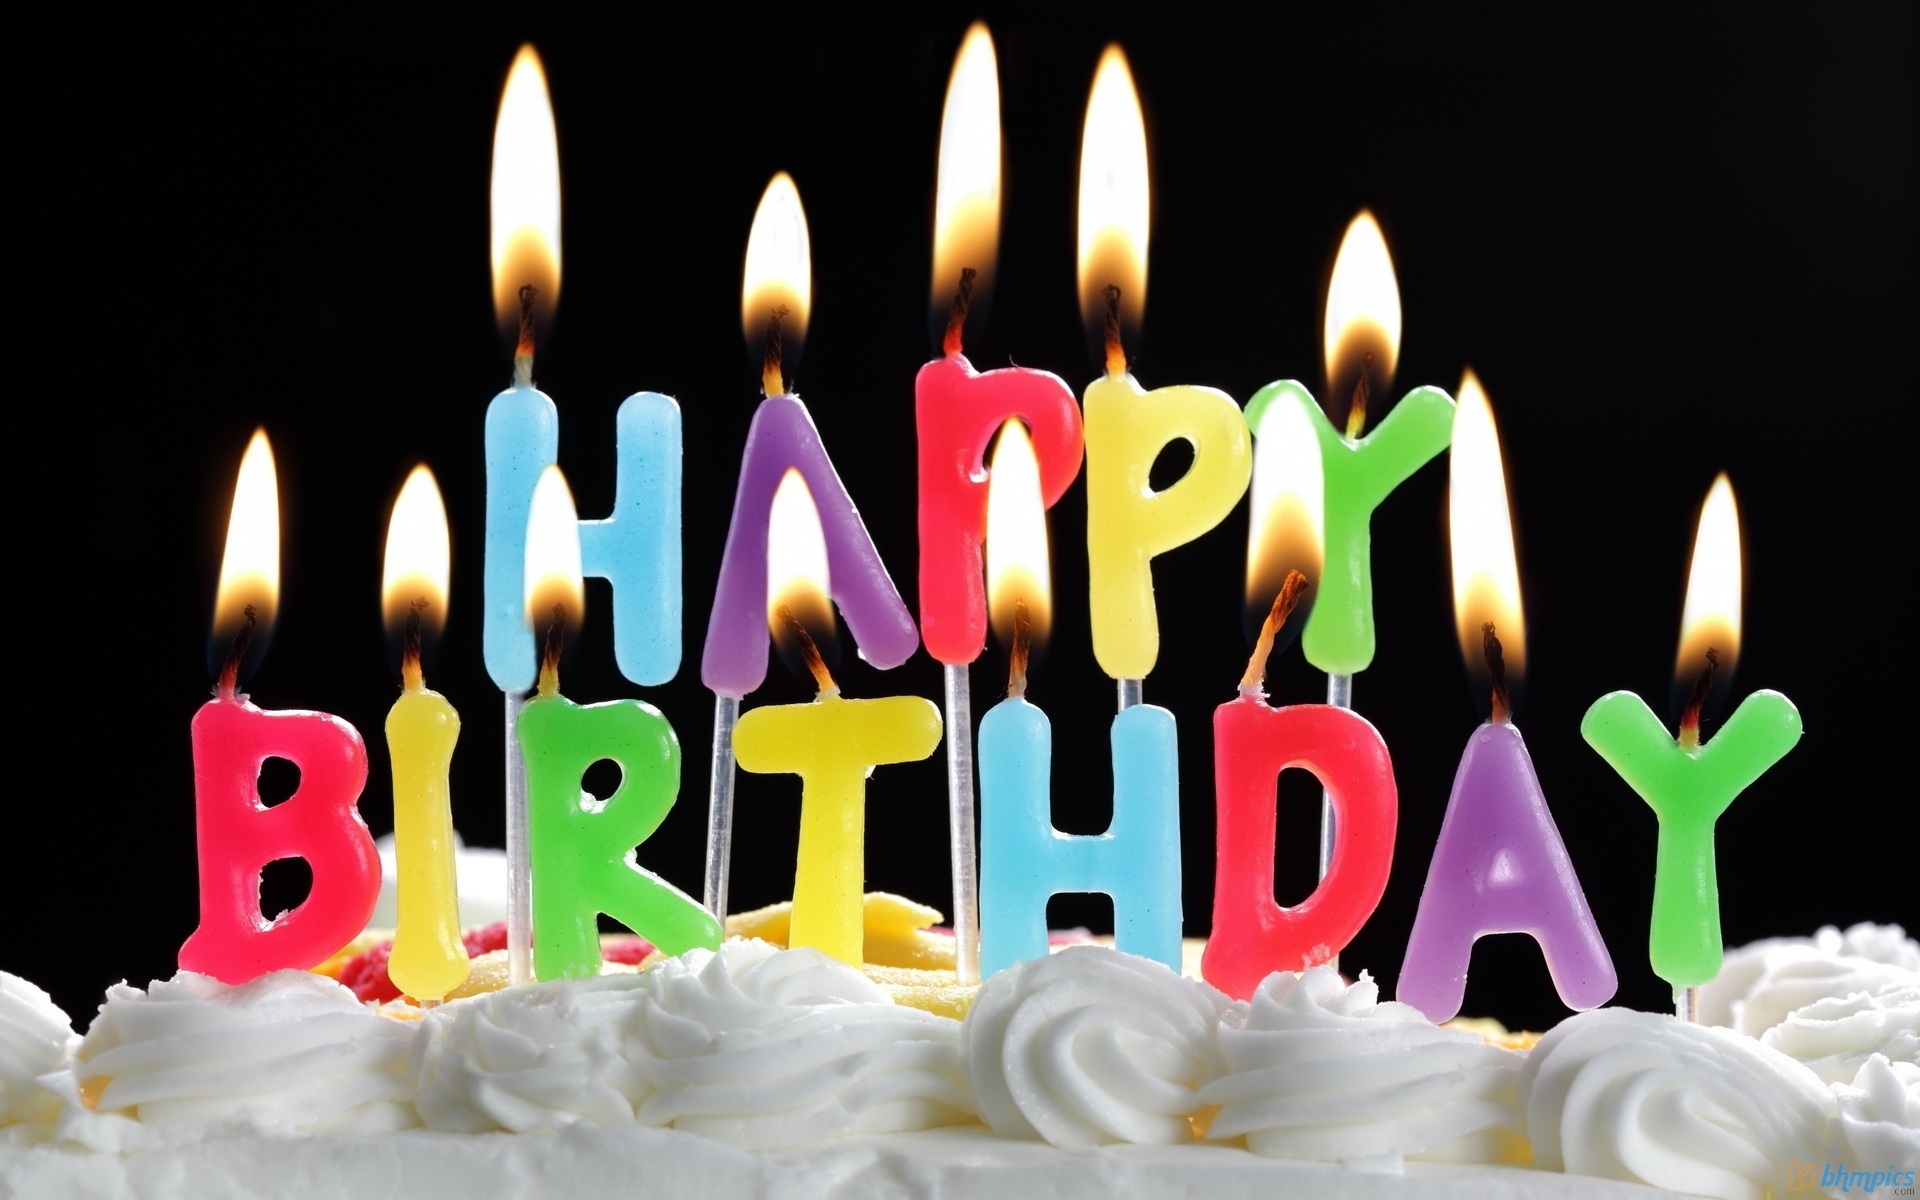 happy_birthday_cake_with_candles-1920x1200-1.jpg